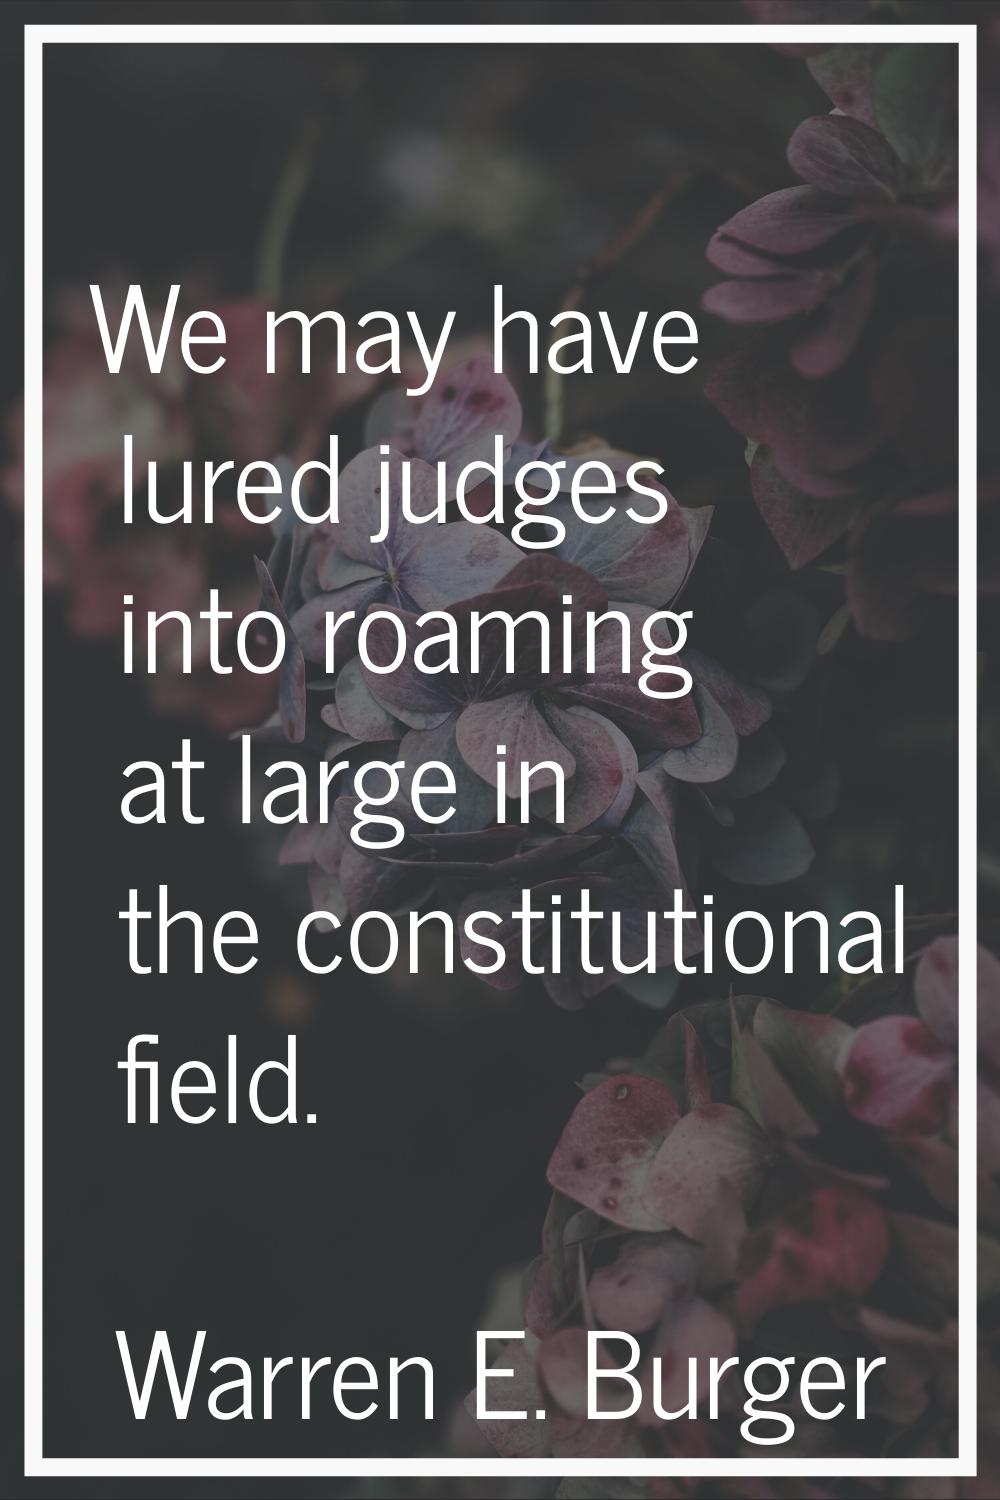 We may have lured judges into roaming at large in the constitutional field.